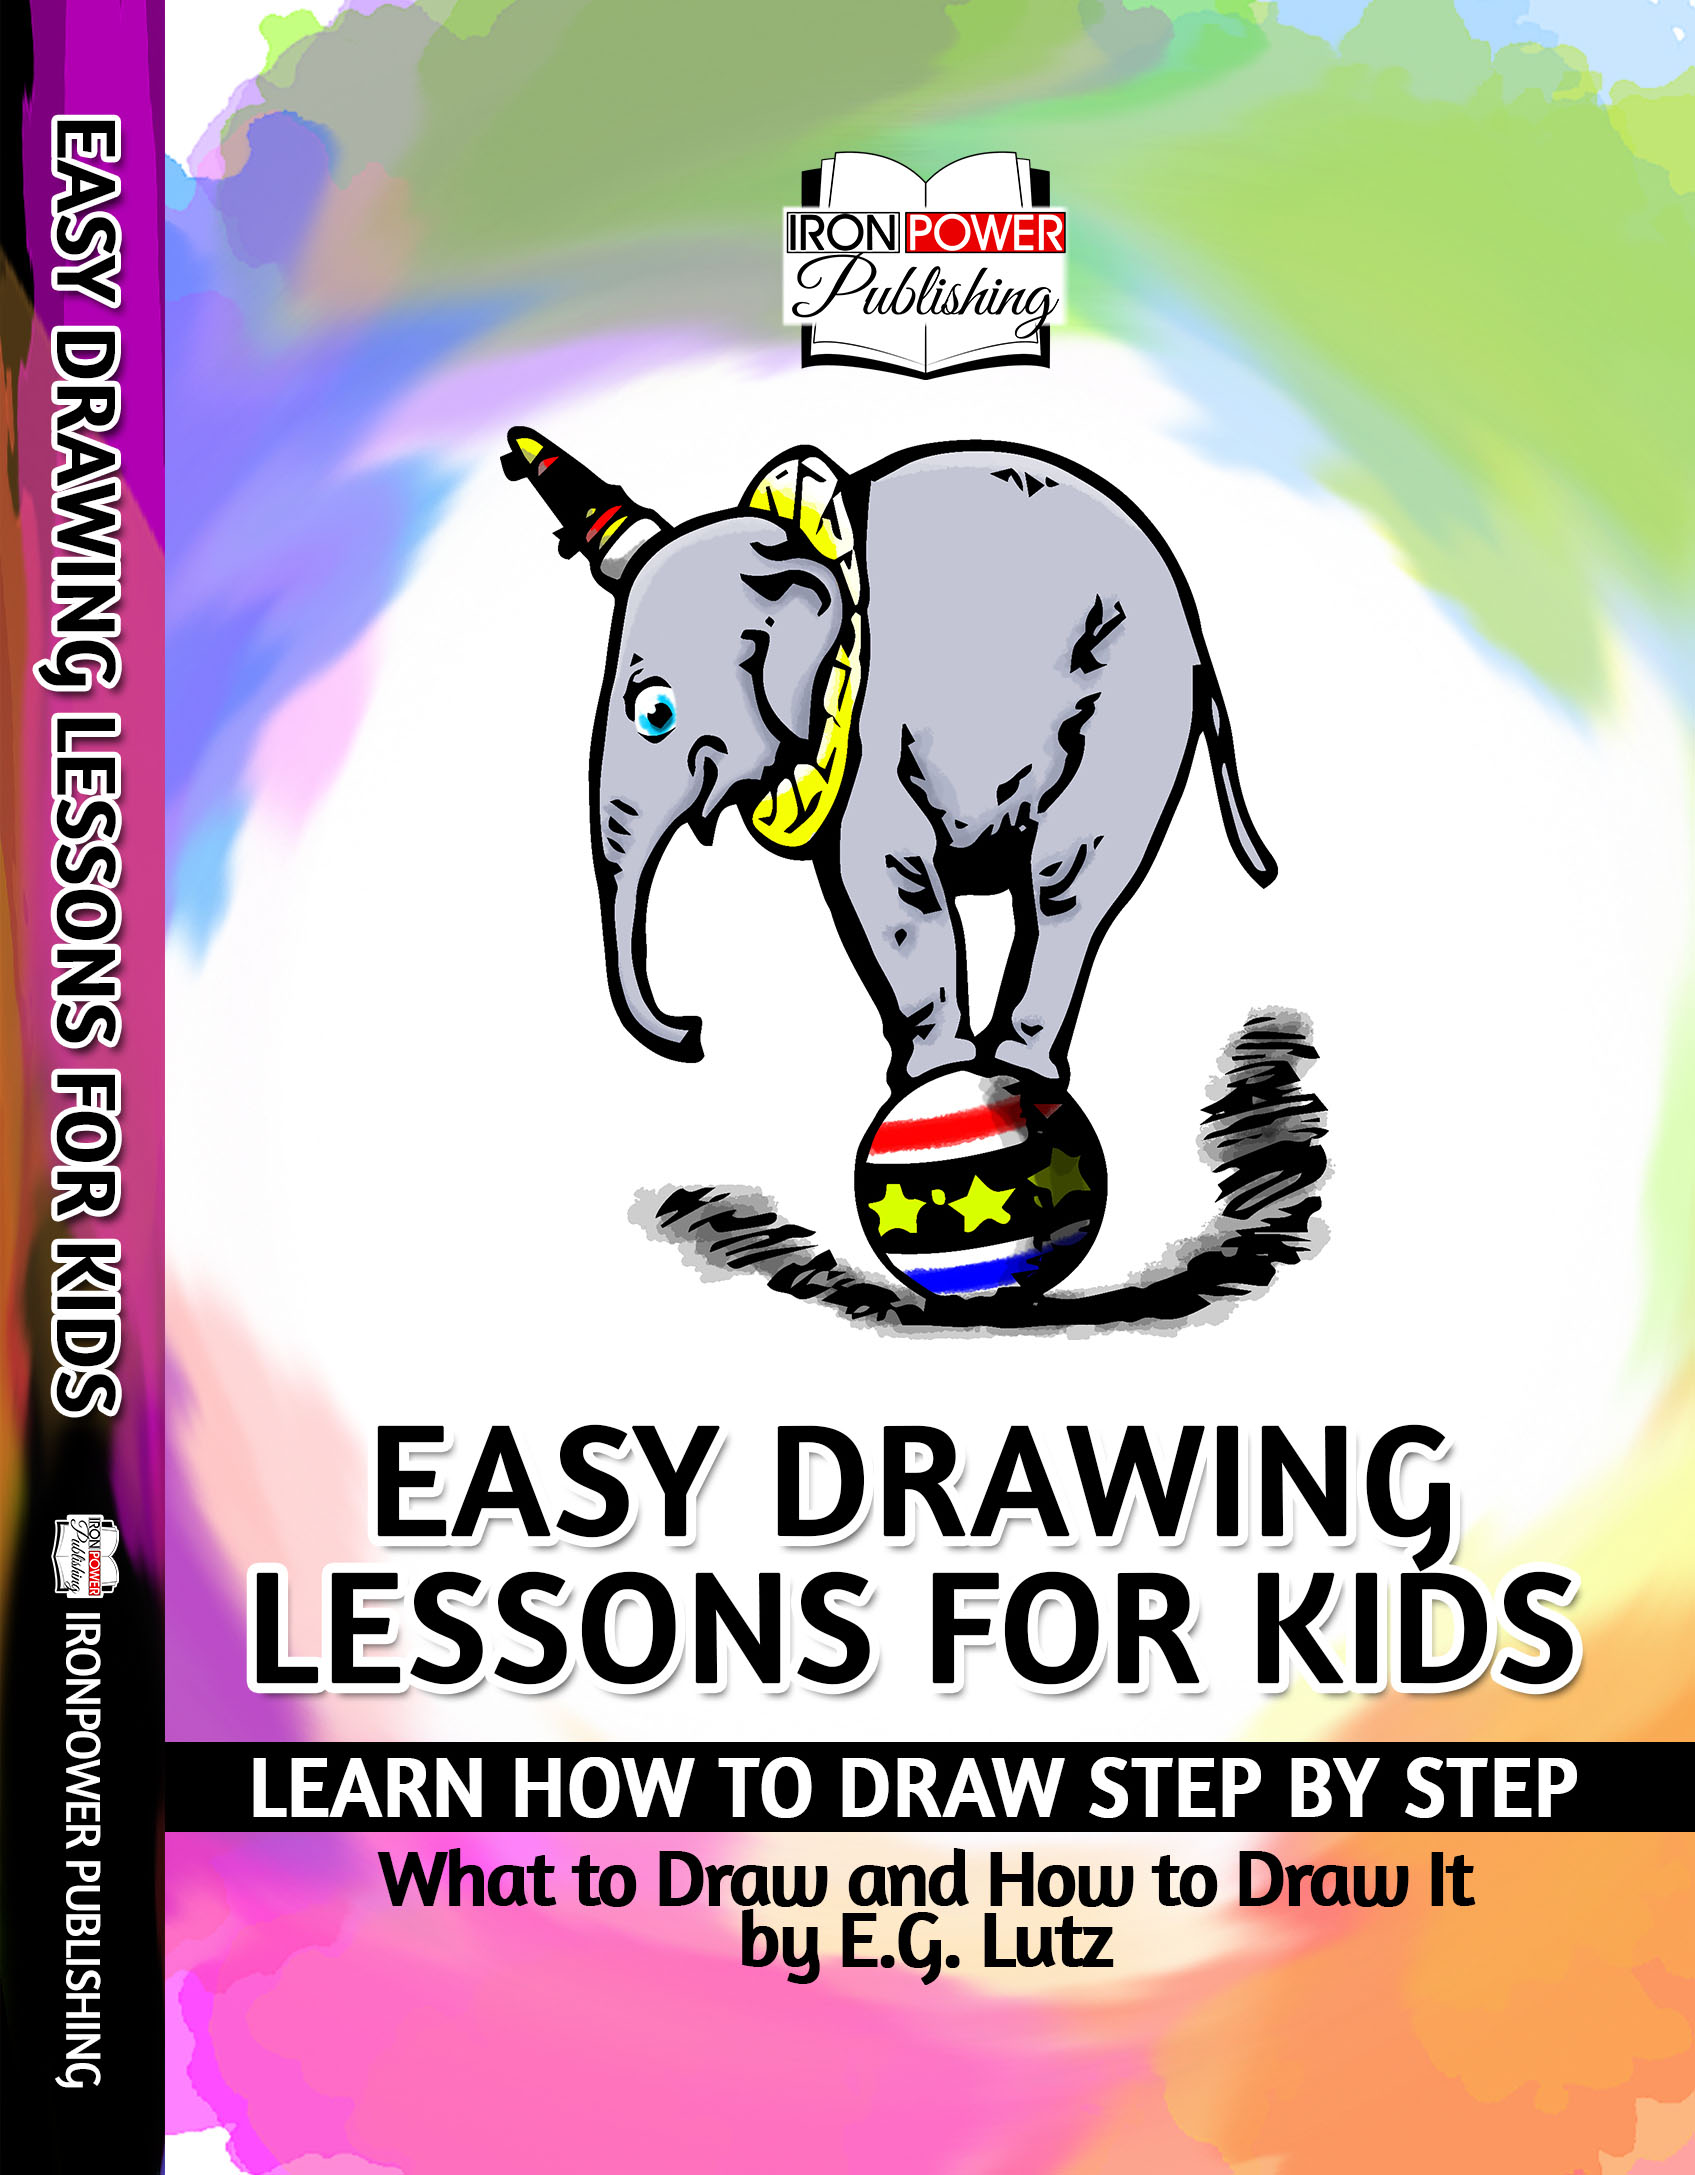 Easy Drawing Lessons for Kids - Learn How to Draw Step by Step